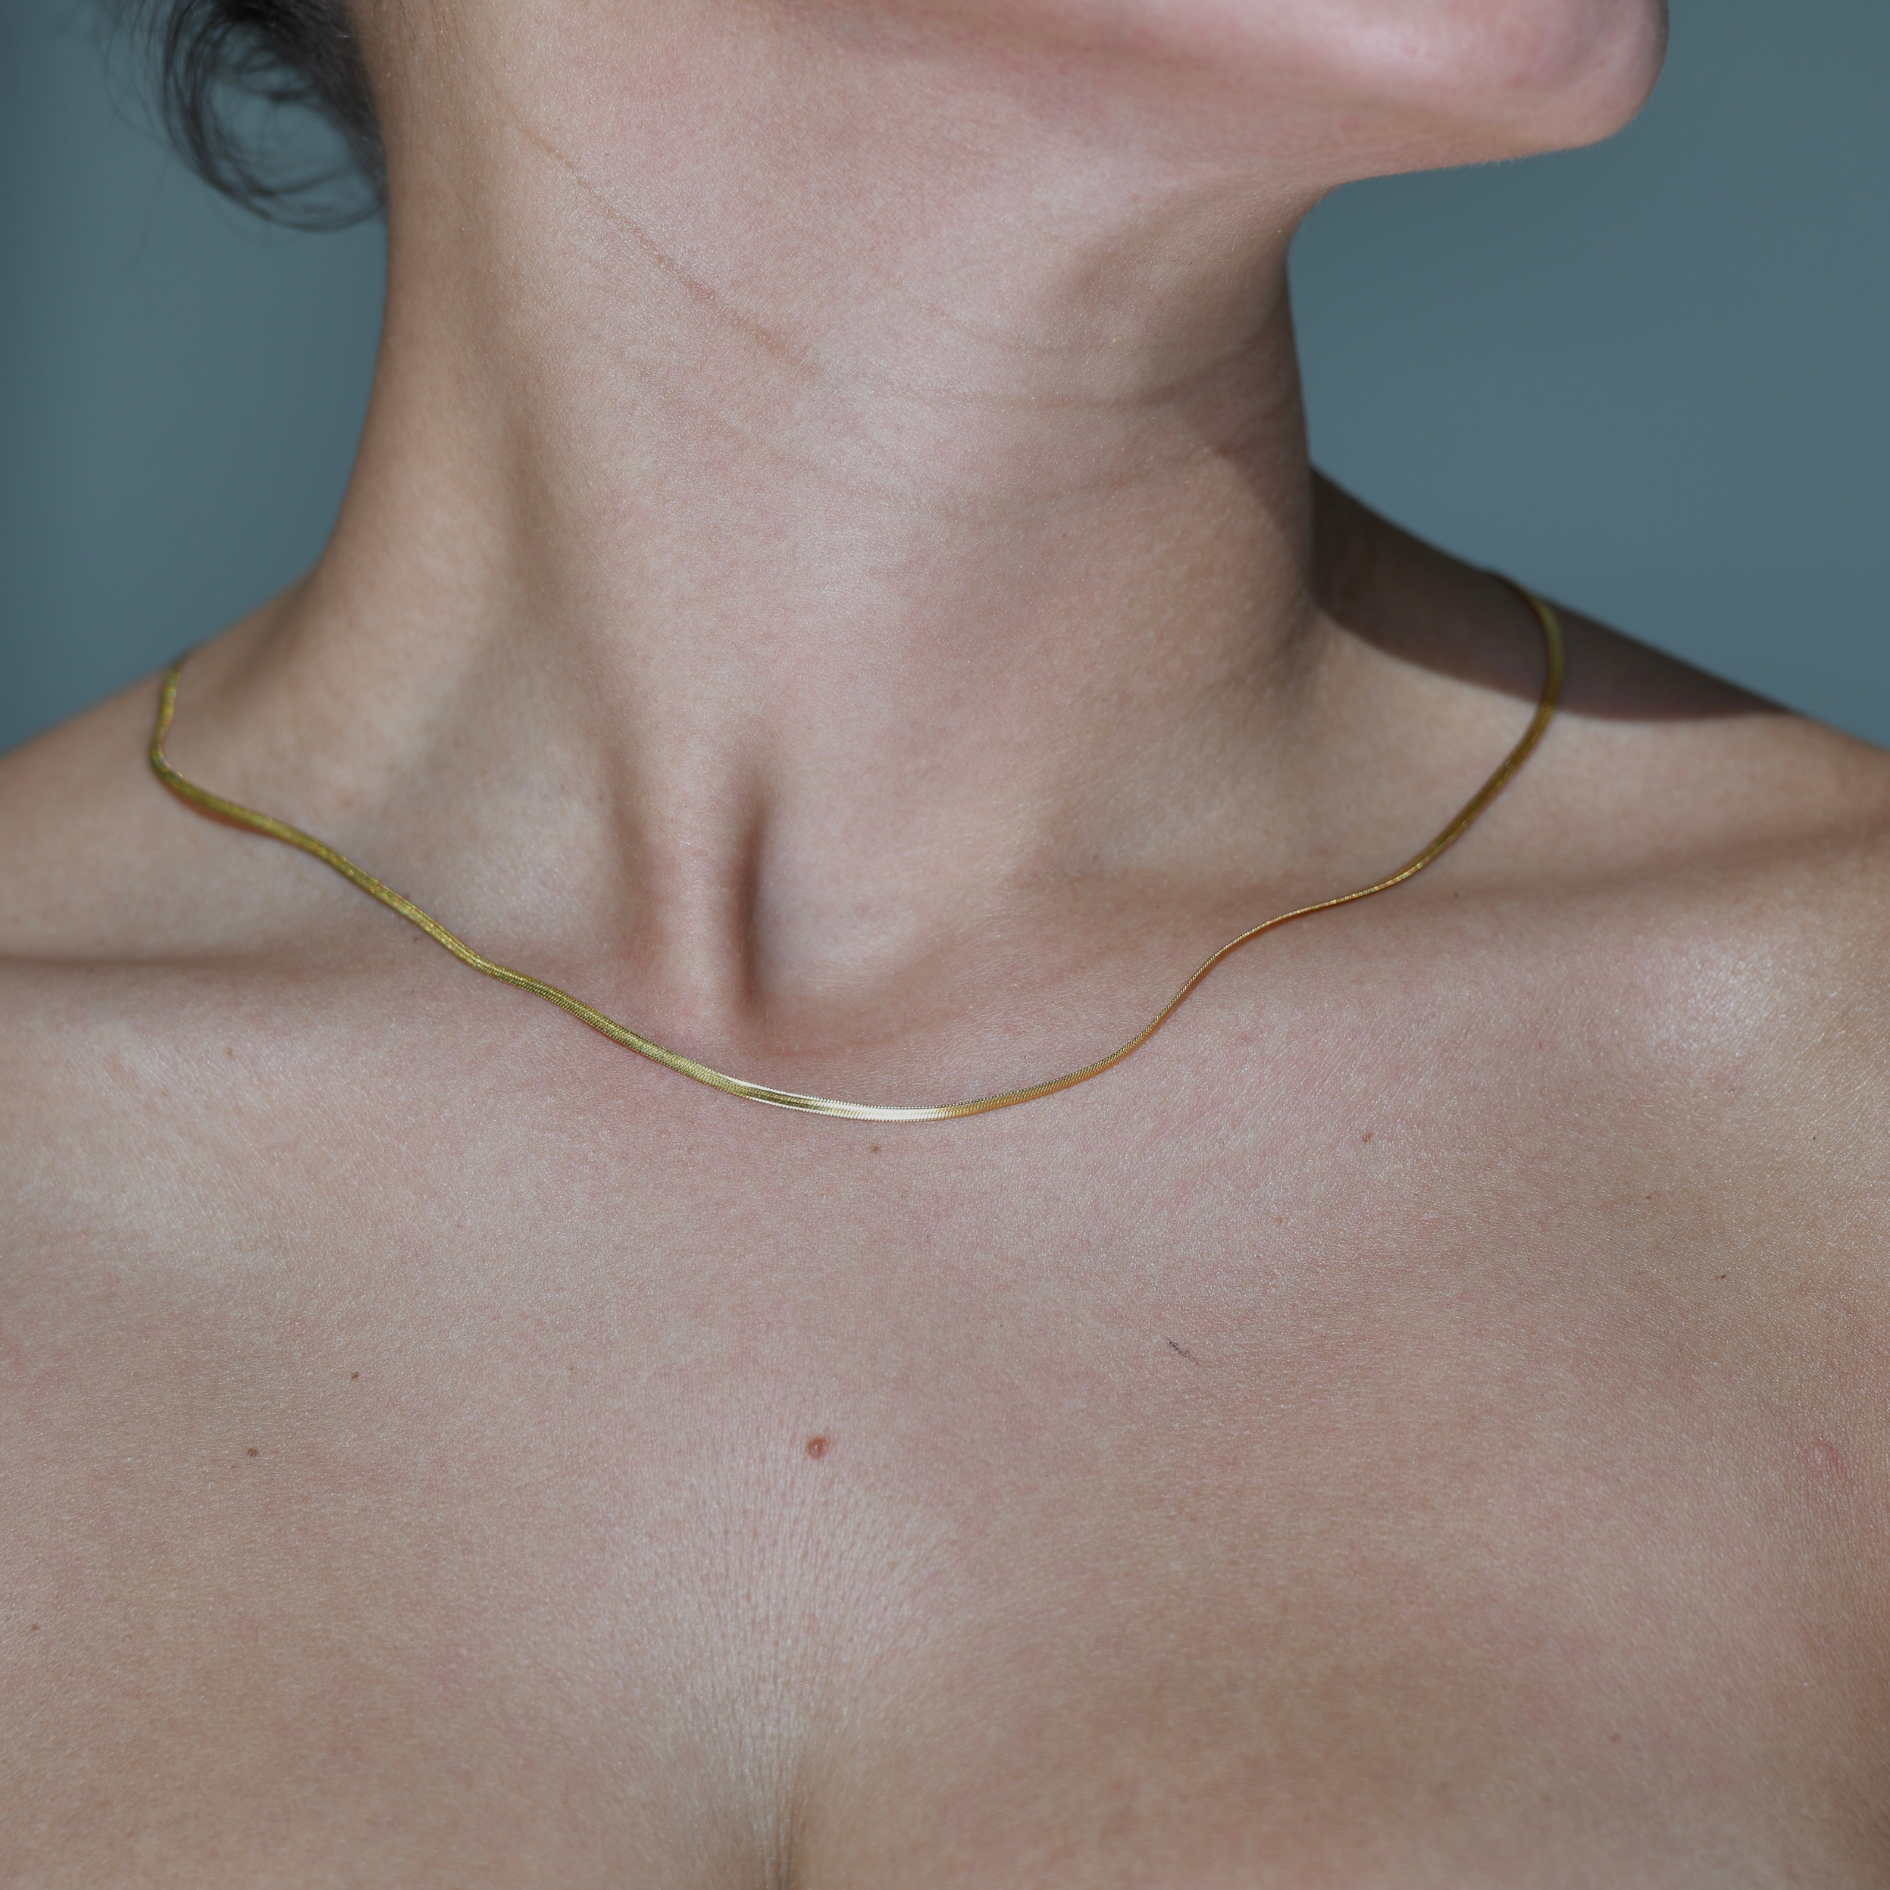 Herringbone necklace texture, two milimetres slim, gold, chain necklace.